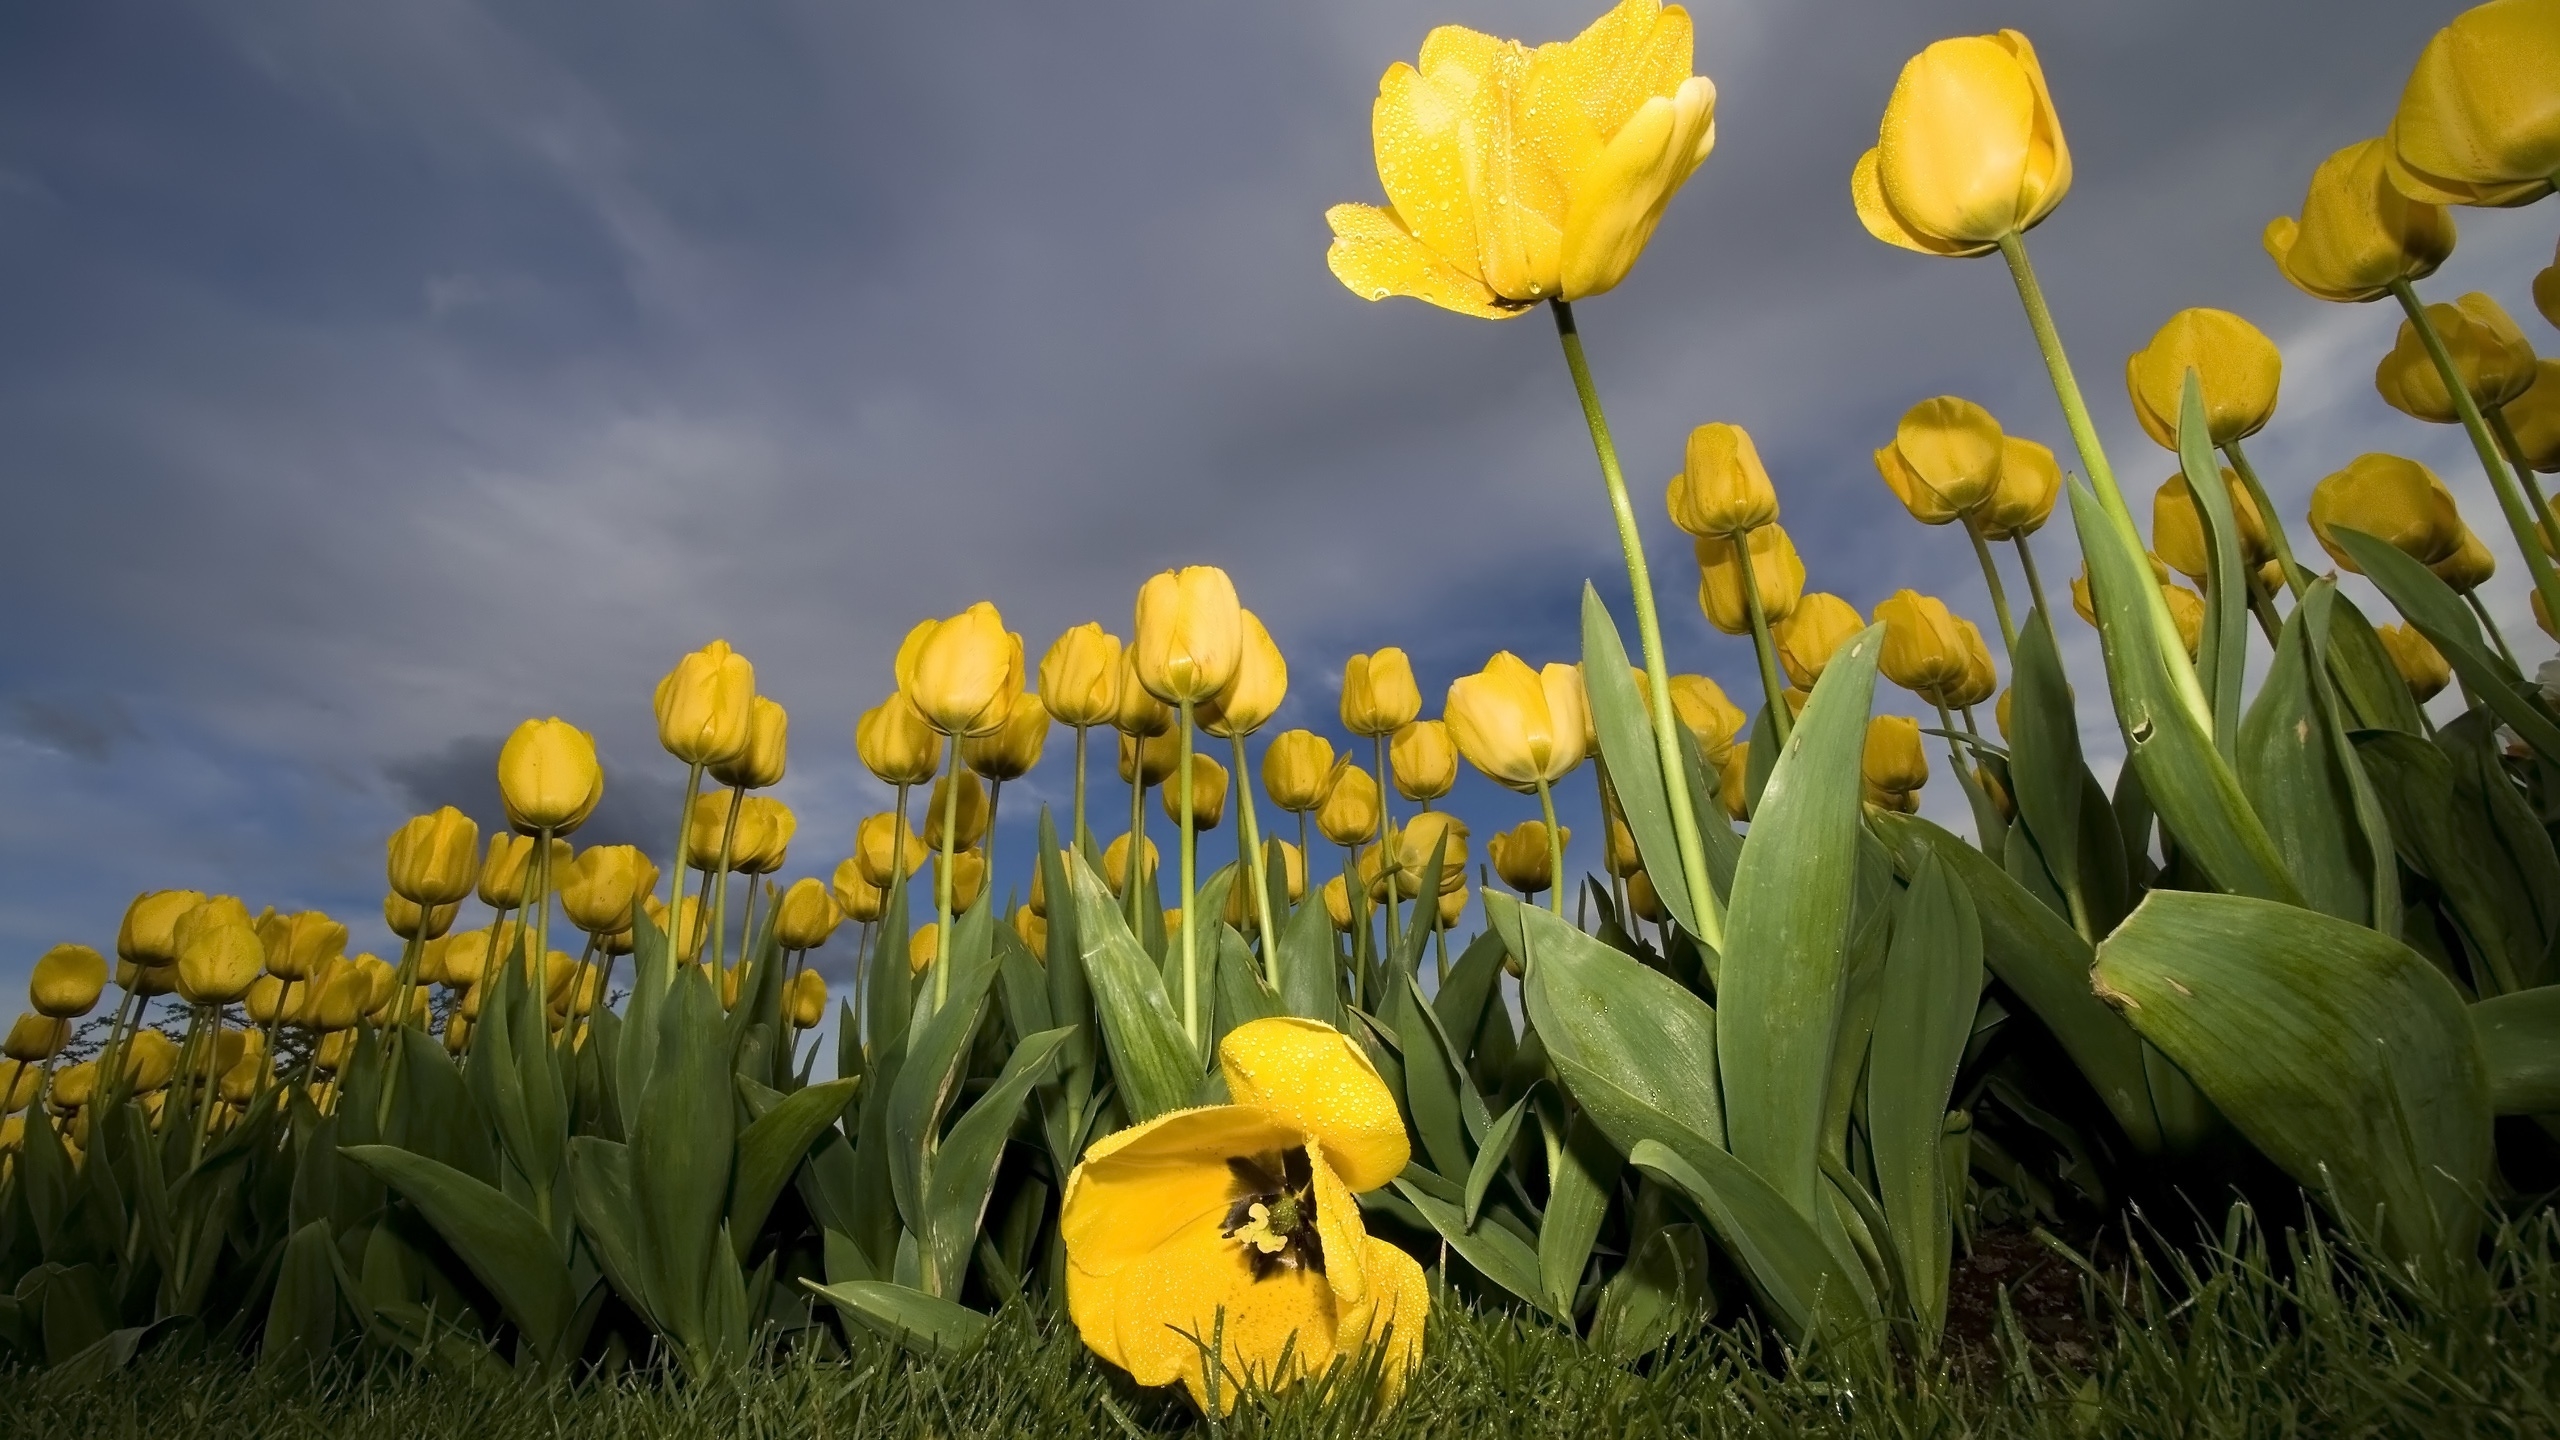 Yellow Tulips for 2560x1440 HDTV resolution